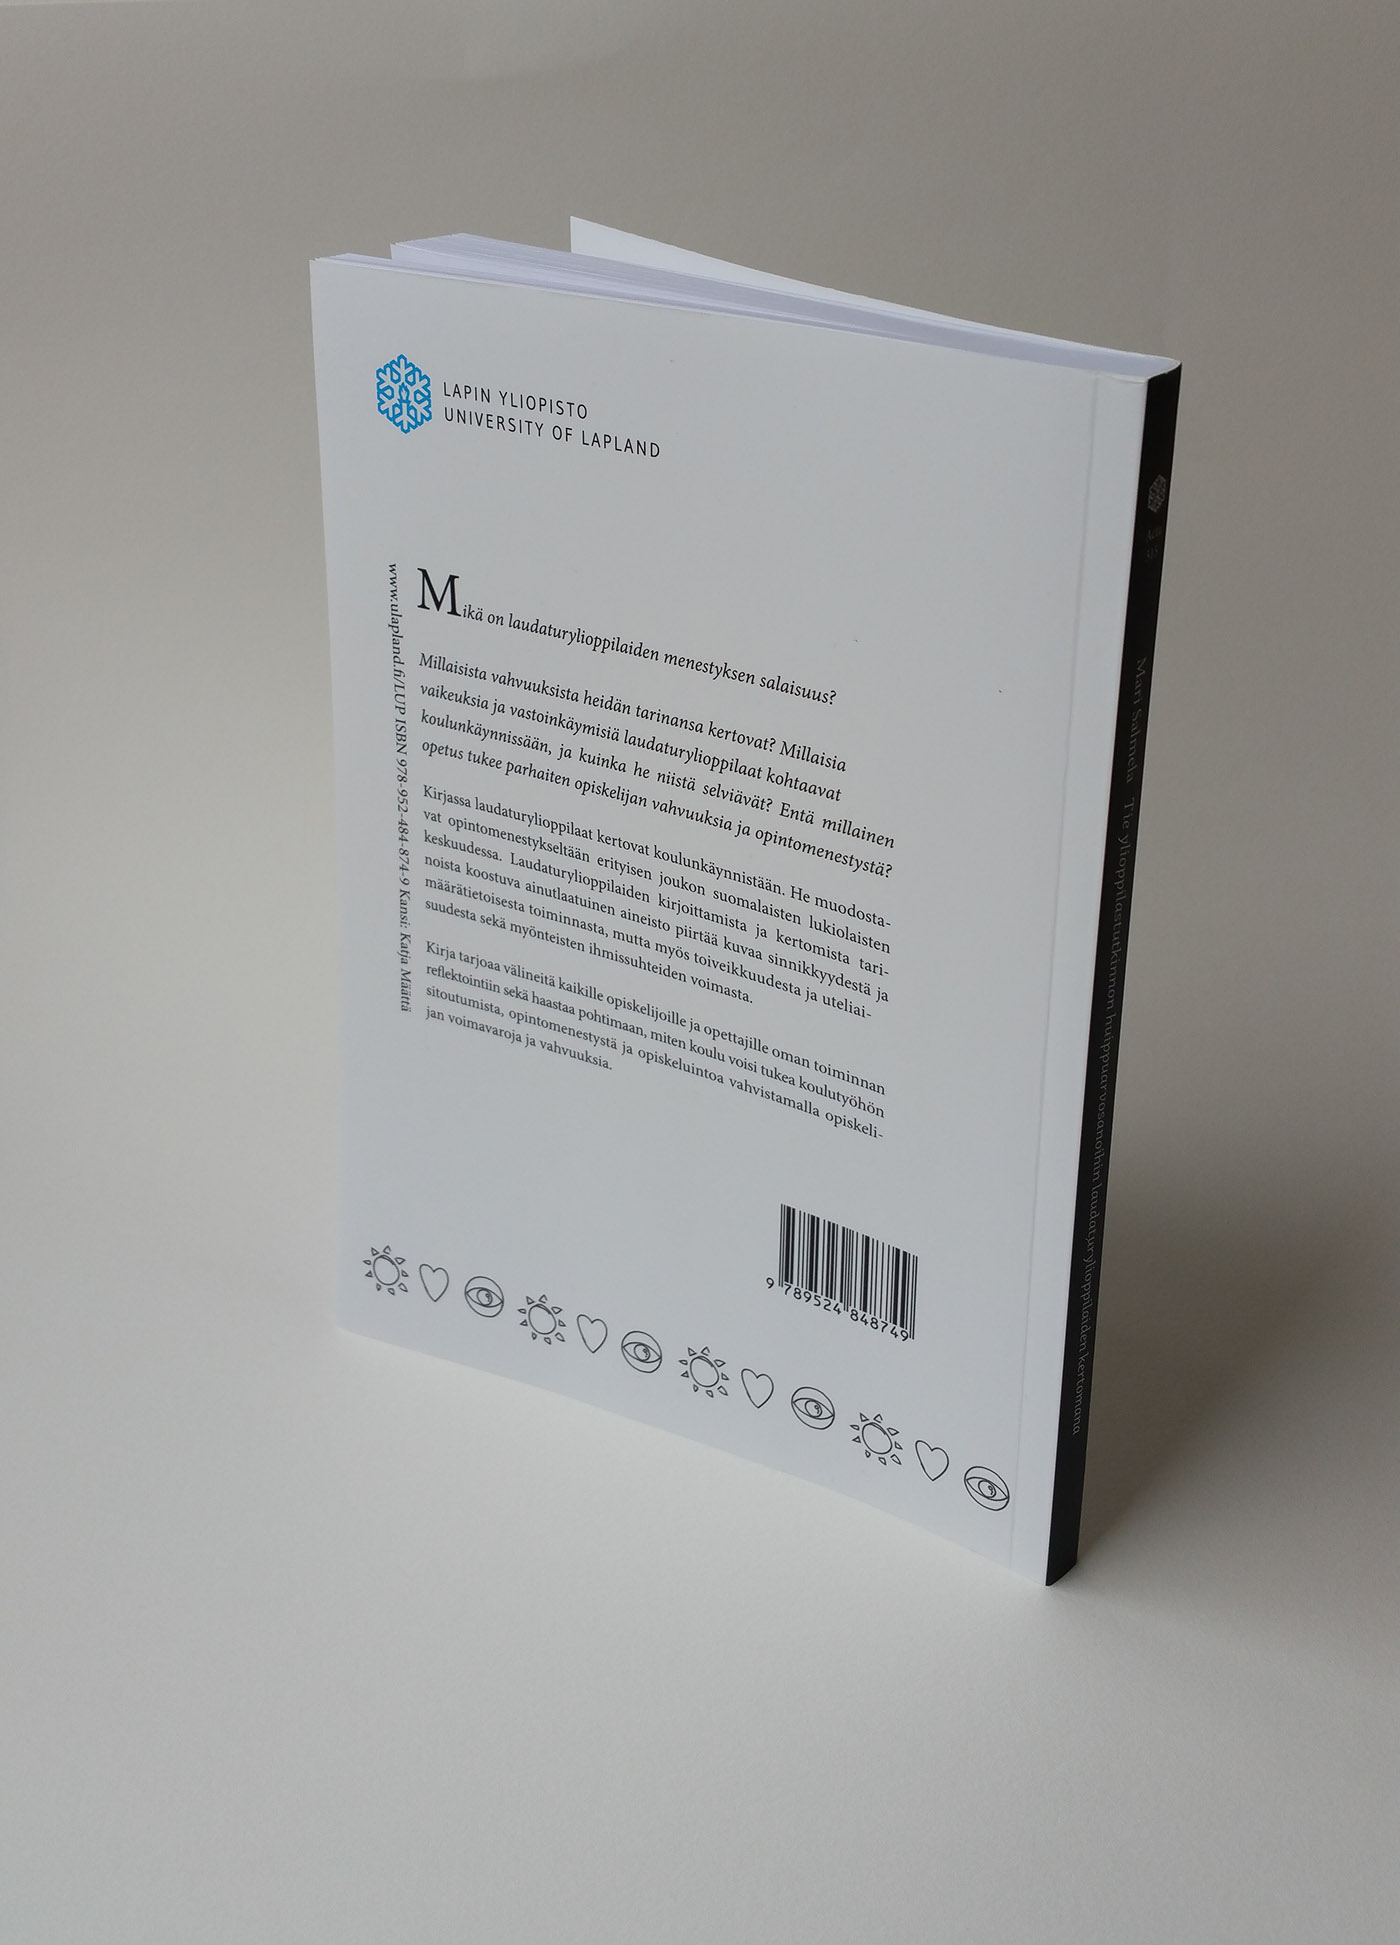 Thesis/ Doctoral thesis book covers